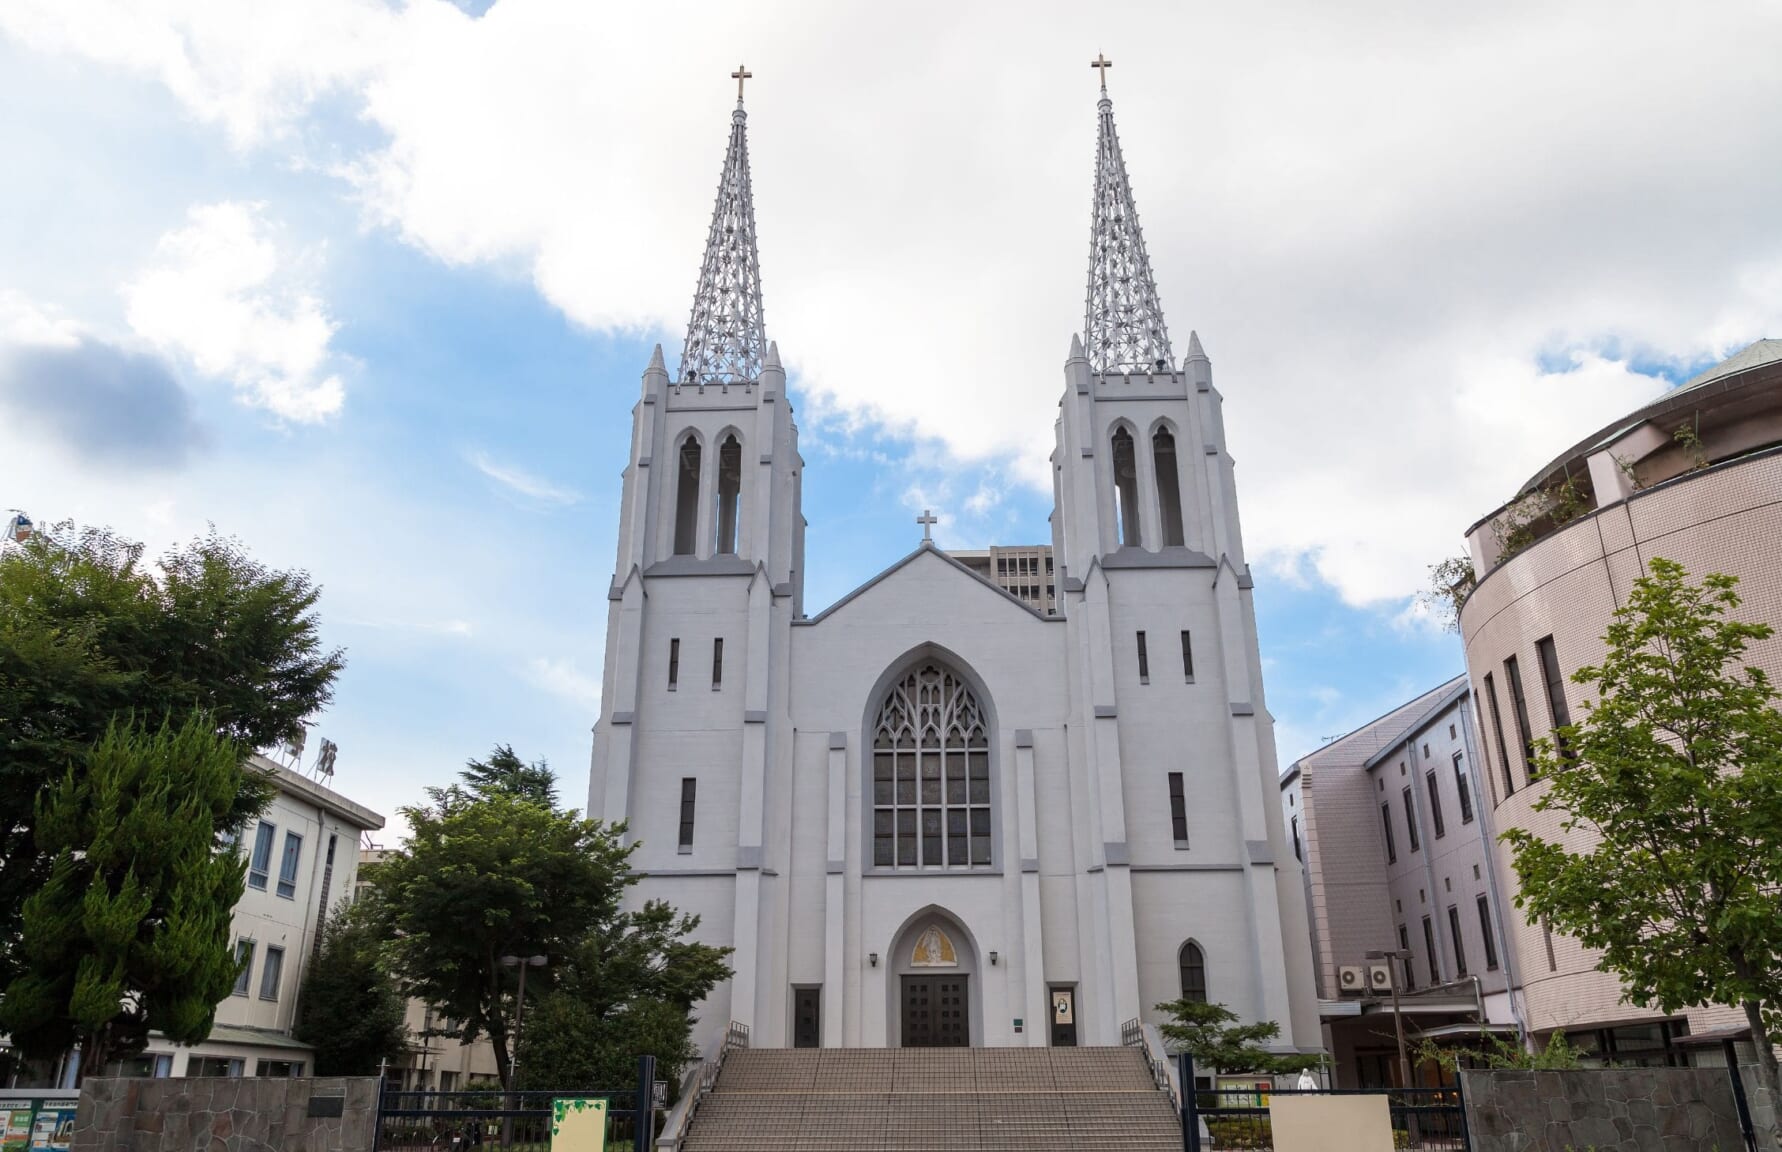 St. Peter and St. Paul Cathedral in Nagoya